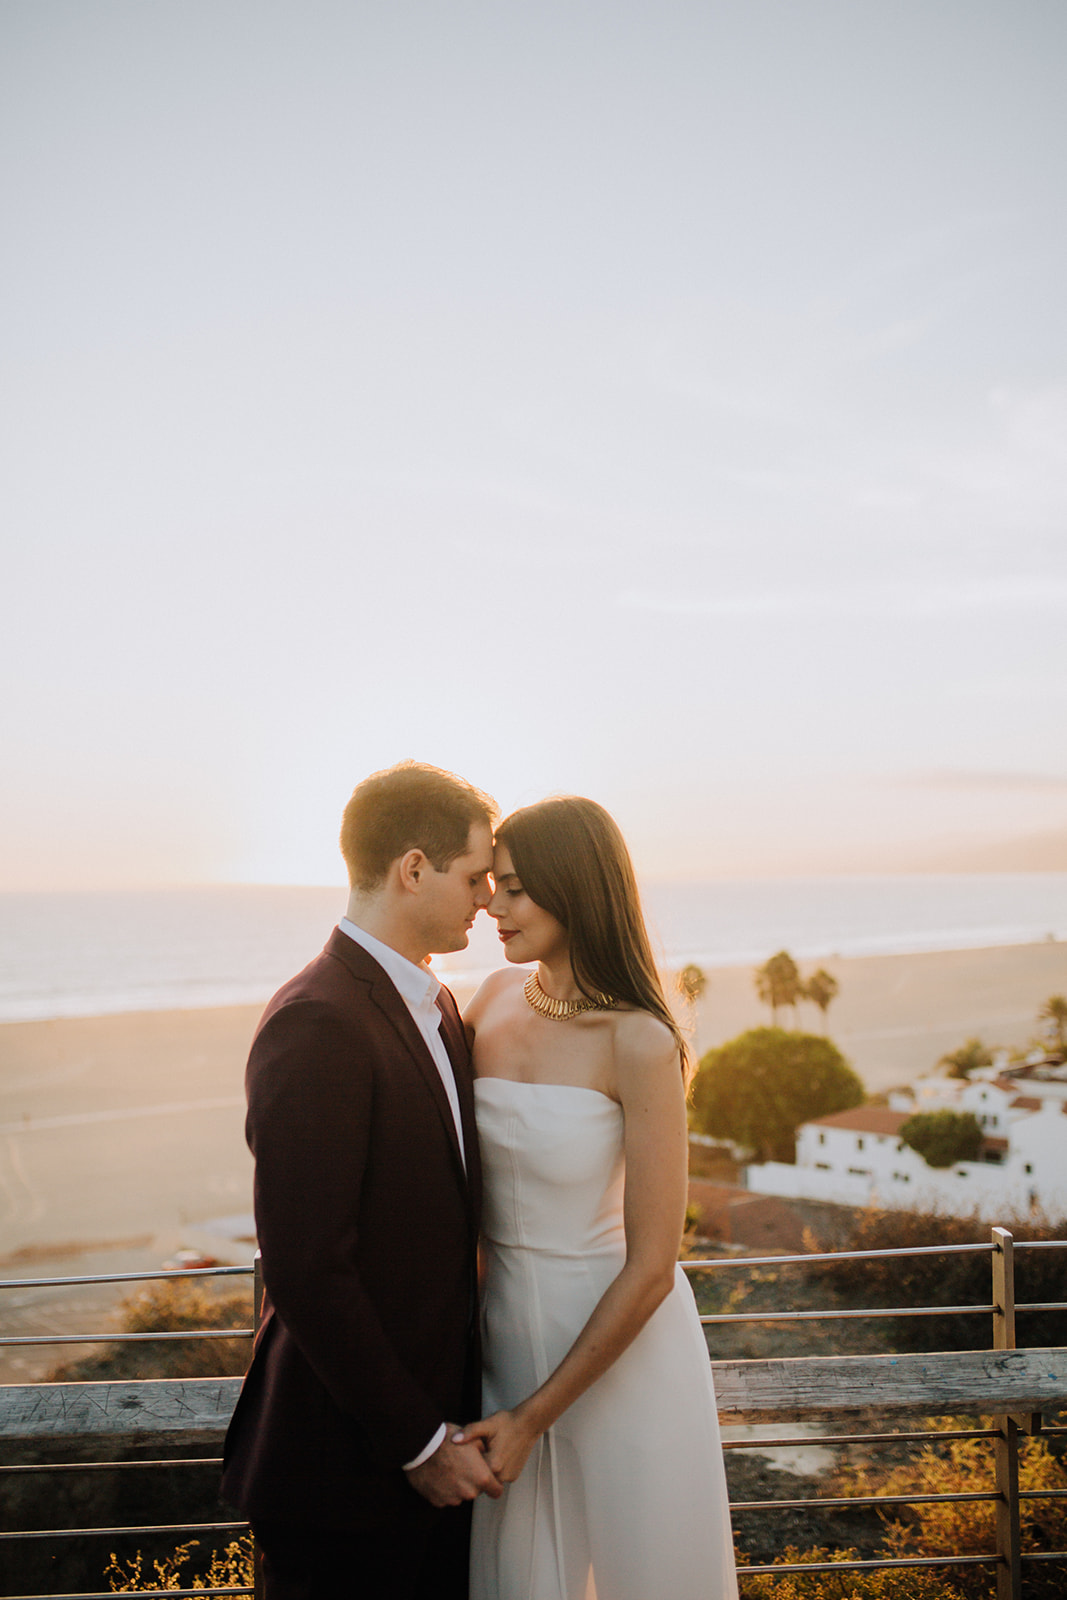 couple pose together with the beautiful beach in the background during their dreamy wedding rehearsal photography